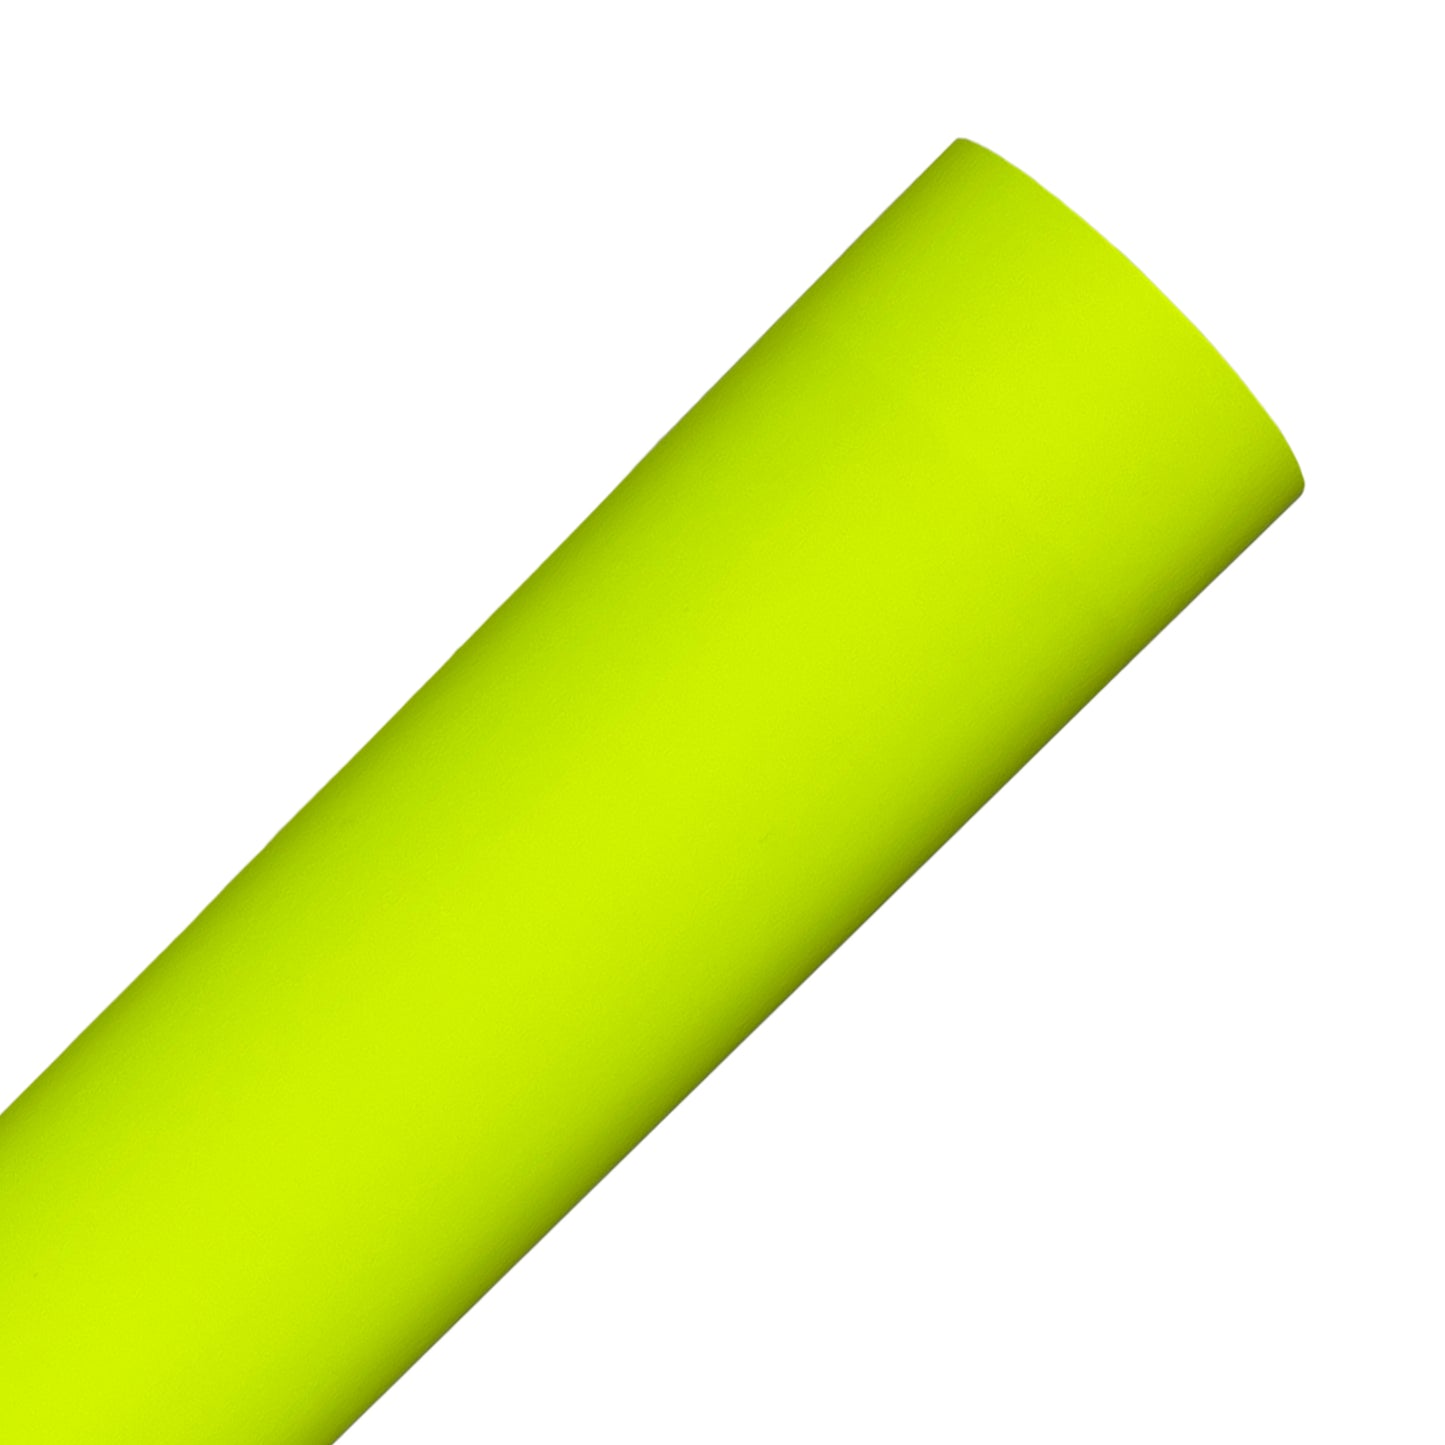 Neon Yellow Silicone Heat Transfer Vinyl Sheets By Craftables